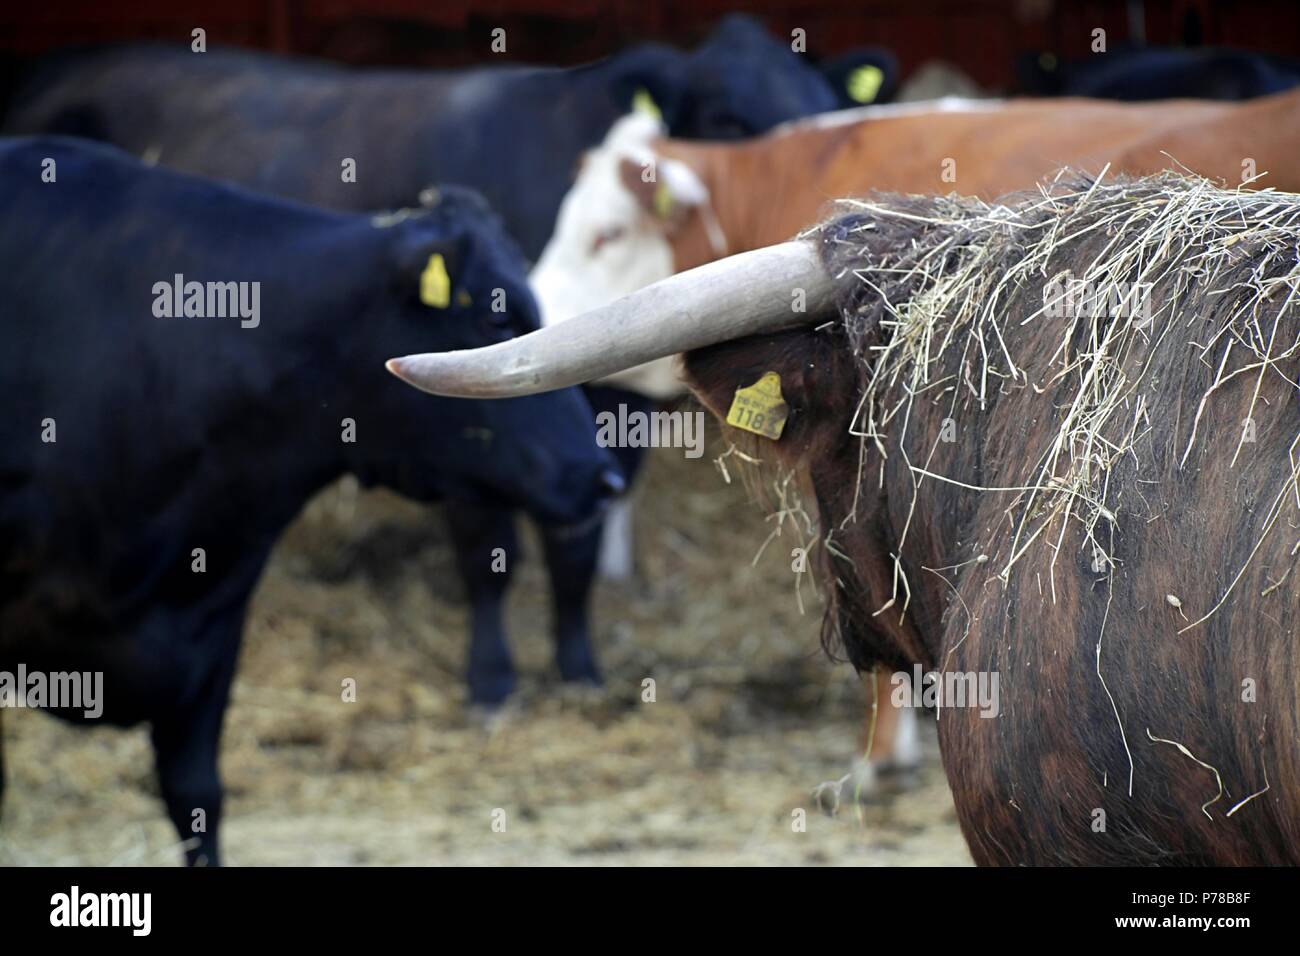 Bull eyeing its harem.  Bull is traditional Scottish breed called Highland cattle. Stock Photo